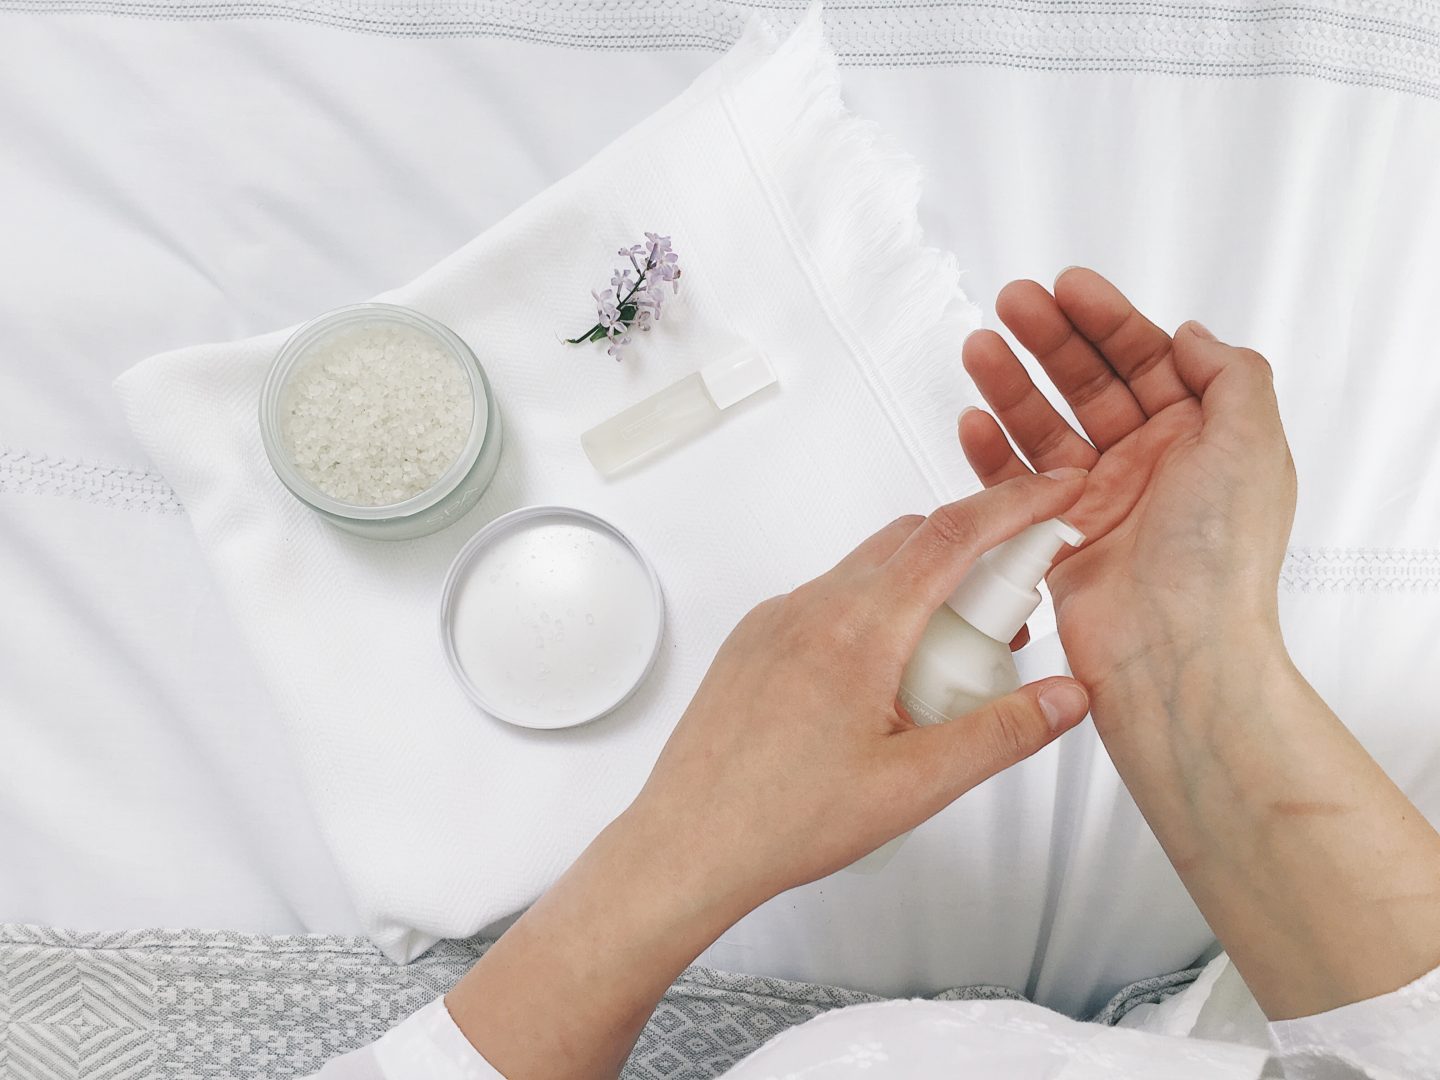 Creating the hotel feel at home: The White Company spa luxuries